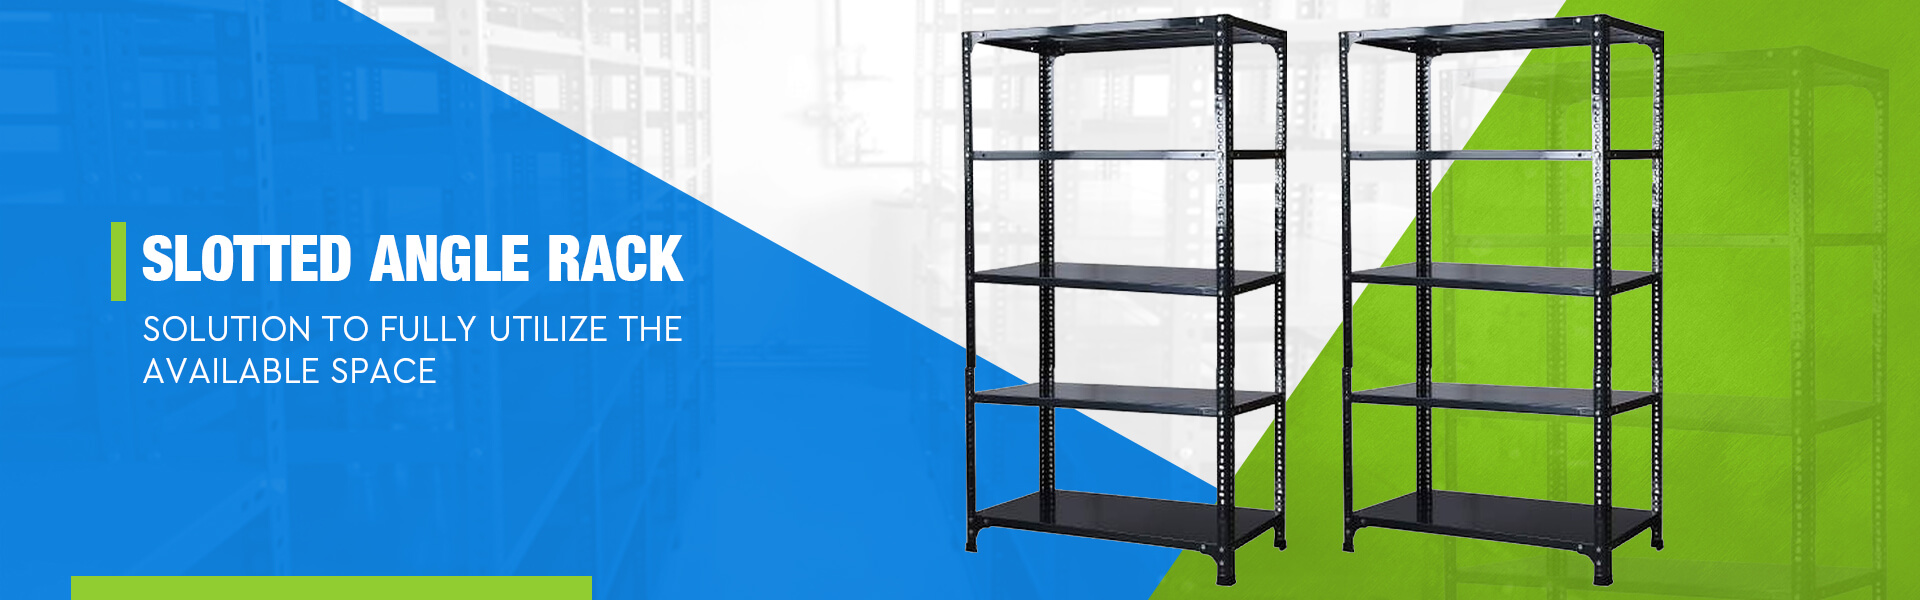 Slotted Angle Rack In Noida